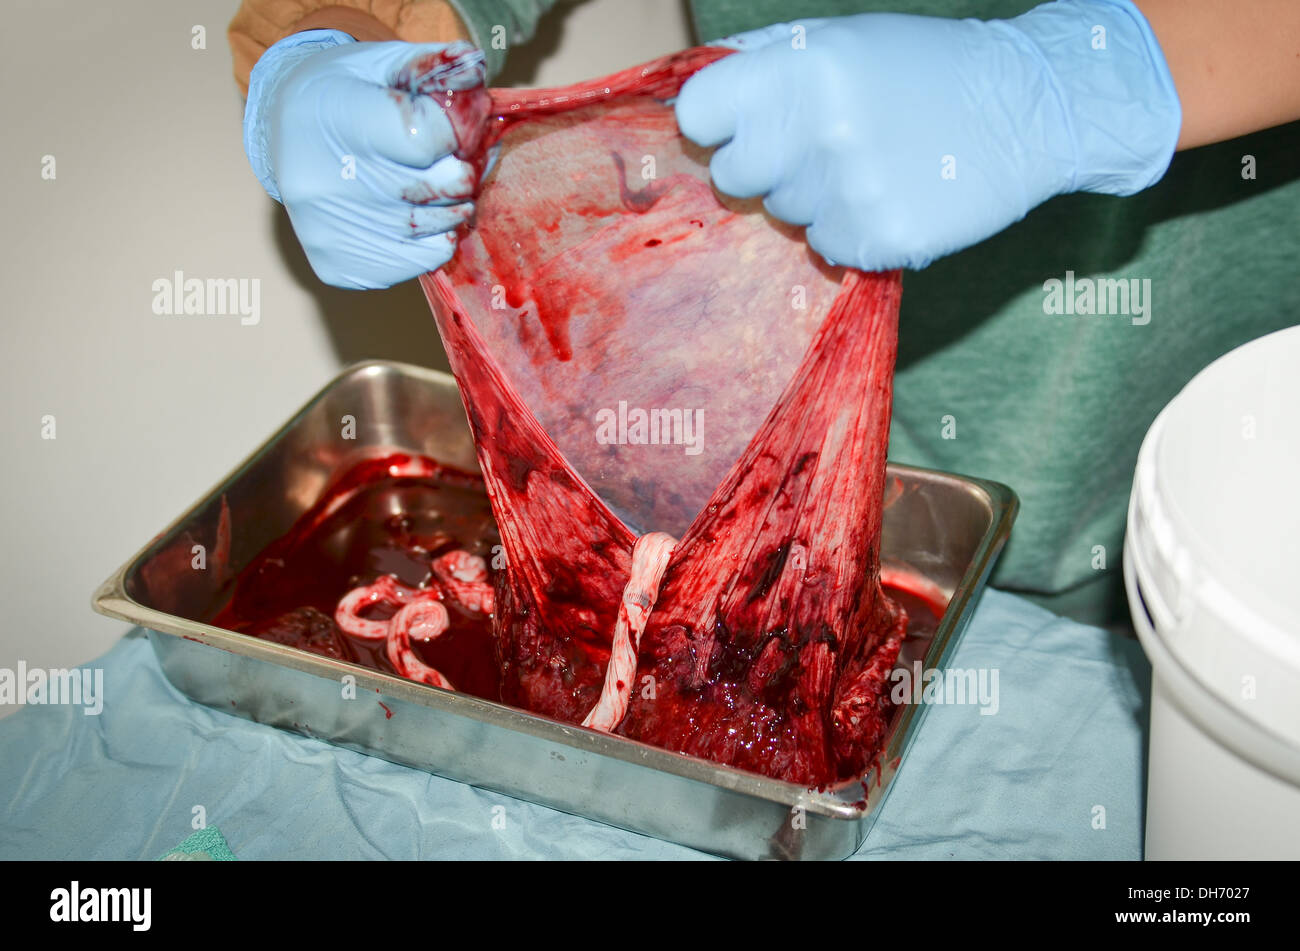 Human Placenta Stretched Open To Reveal Internal Sack Stock Photo